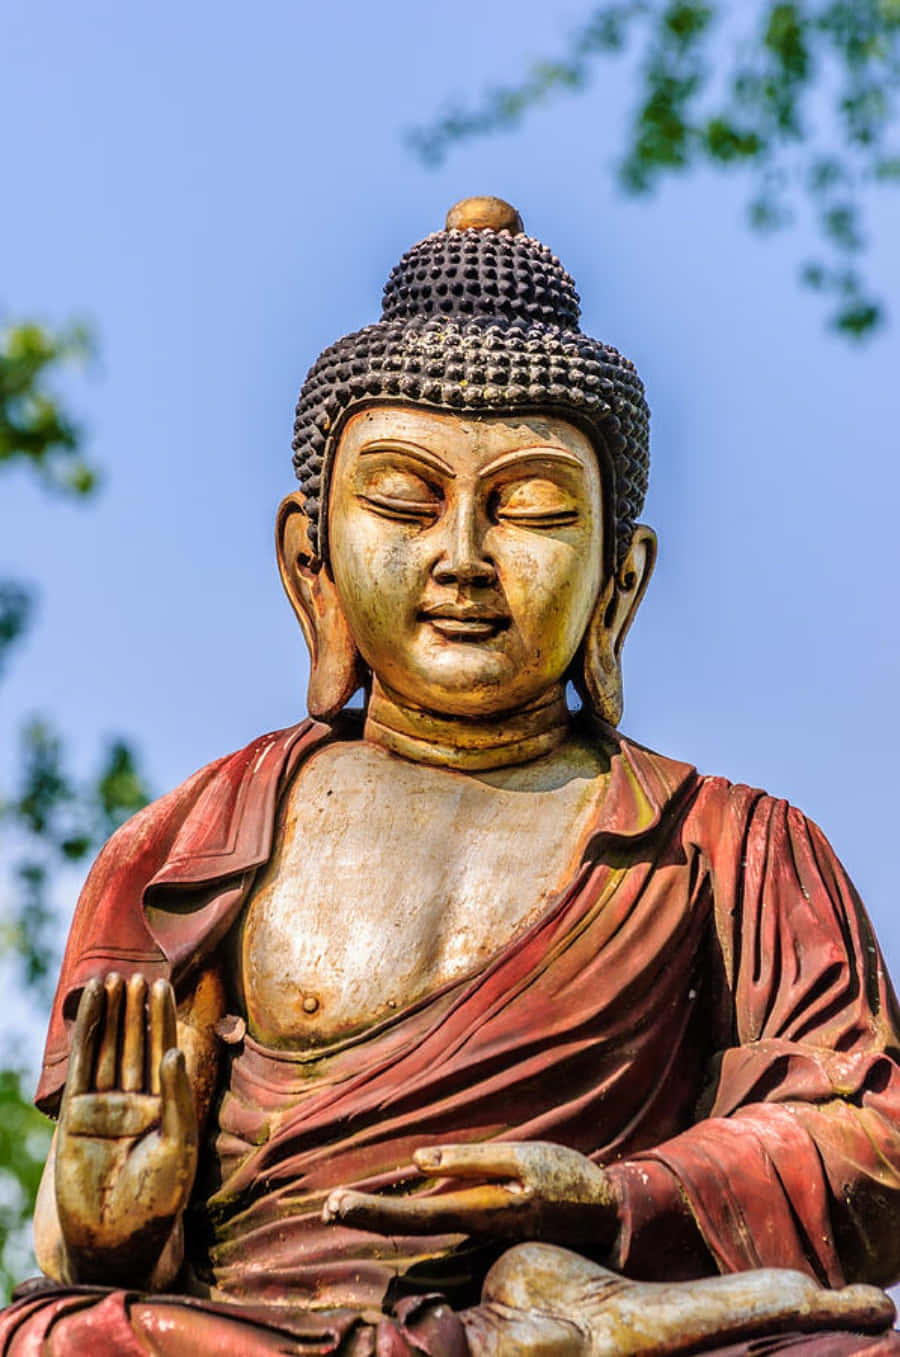 A Statue Of A Buddha Sitting In The Sun